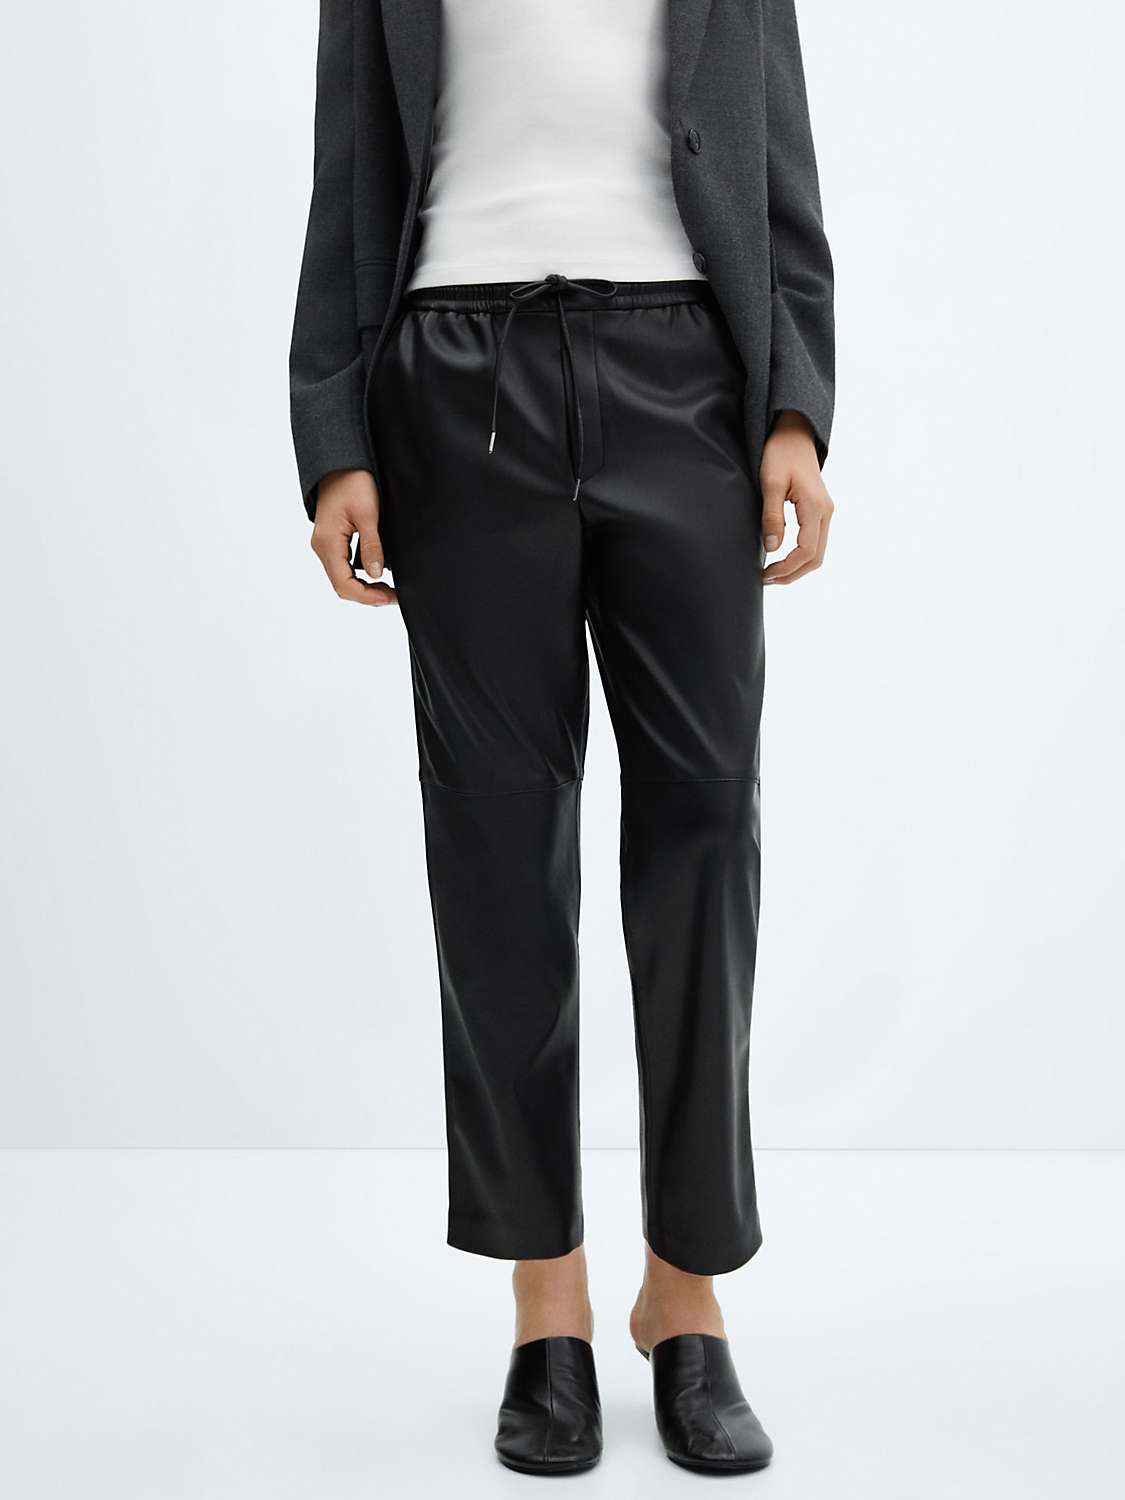 Buy Mango Apple Faux Leather Trousers, Black Online at johnlewis.com